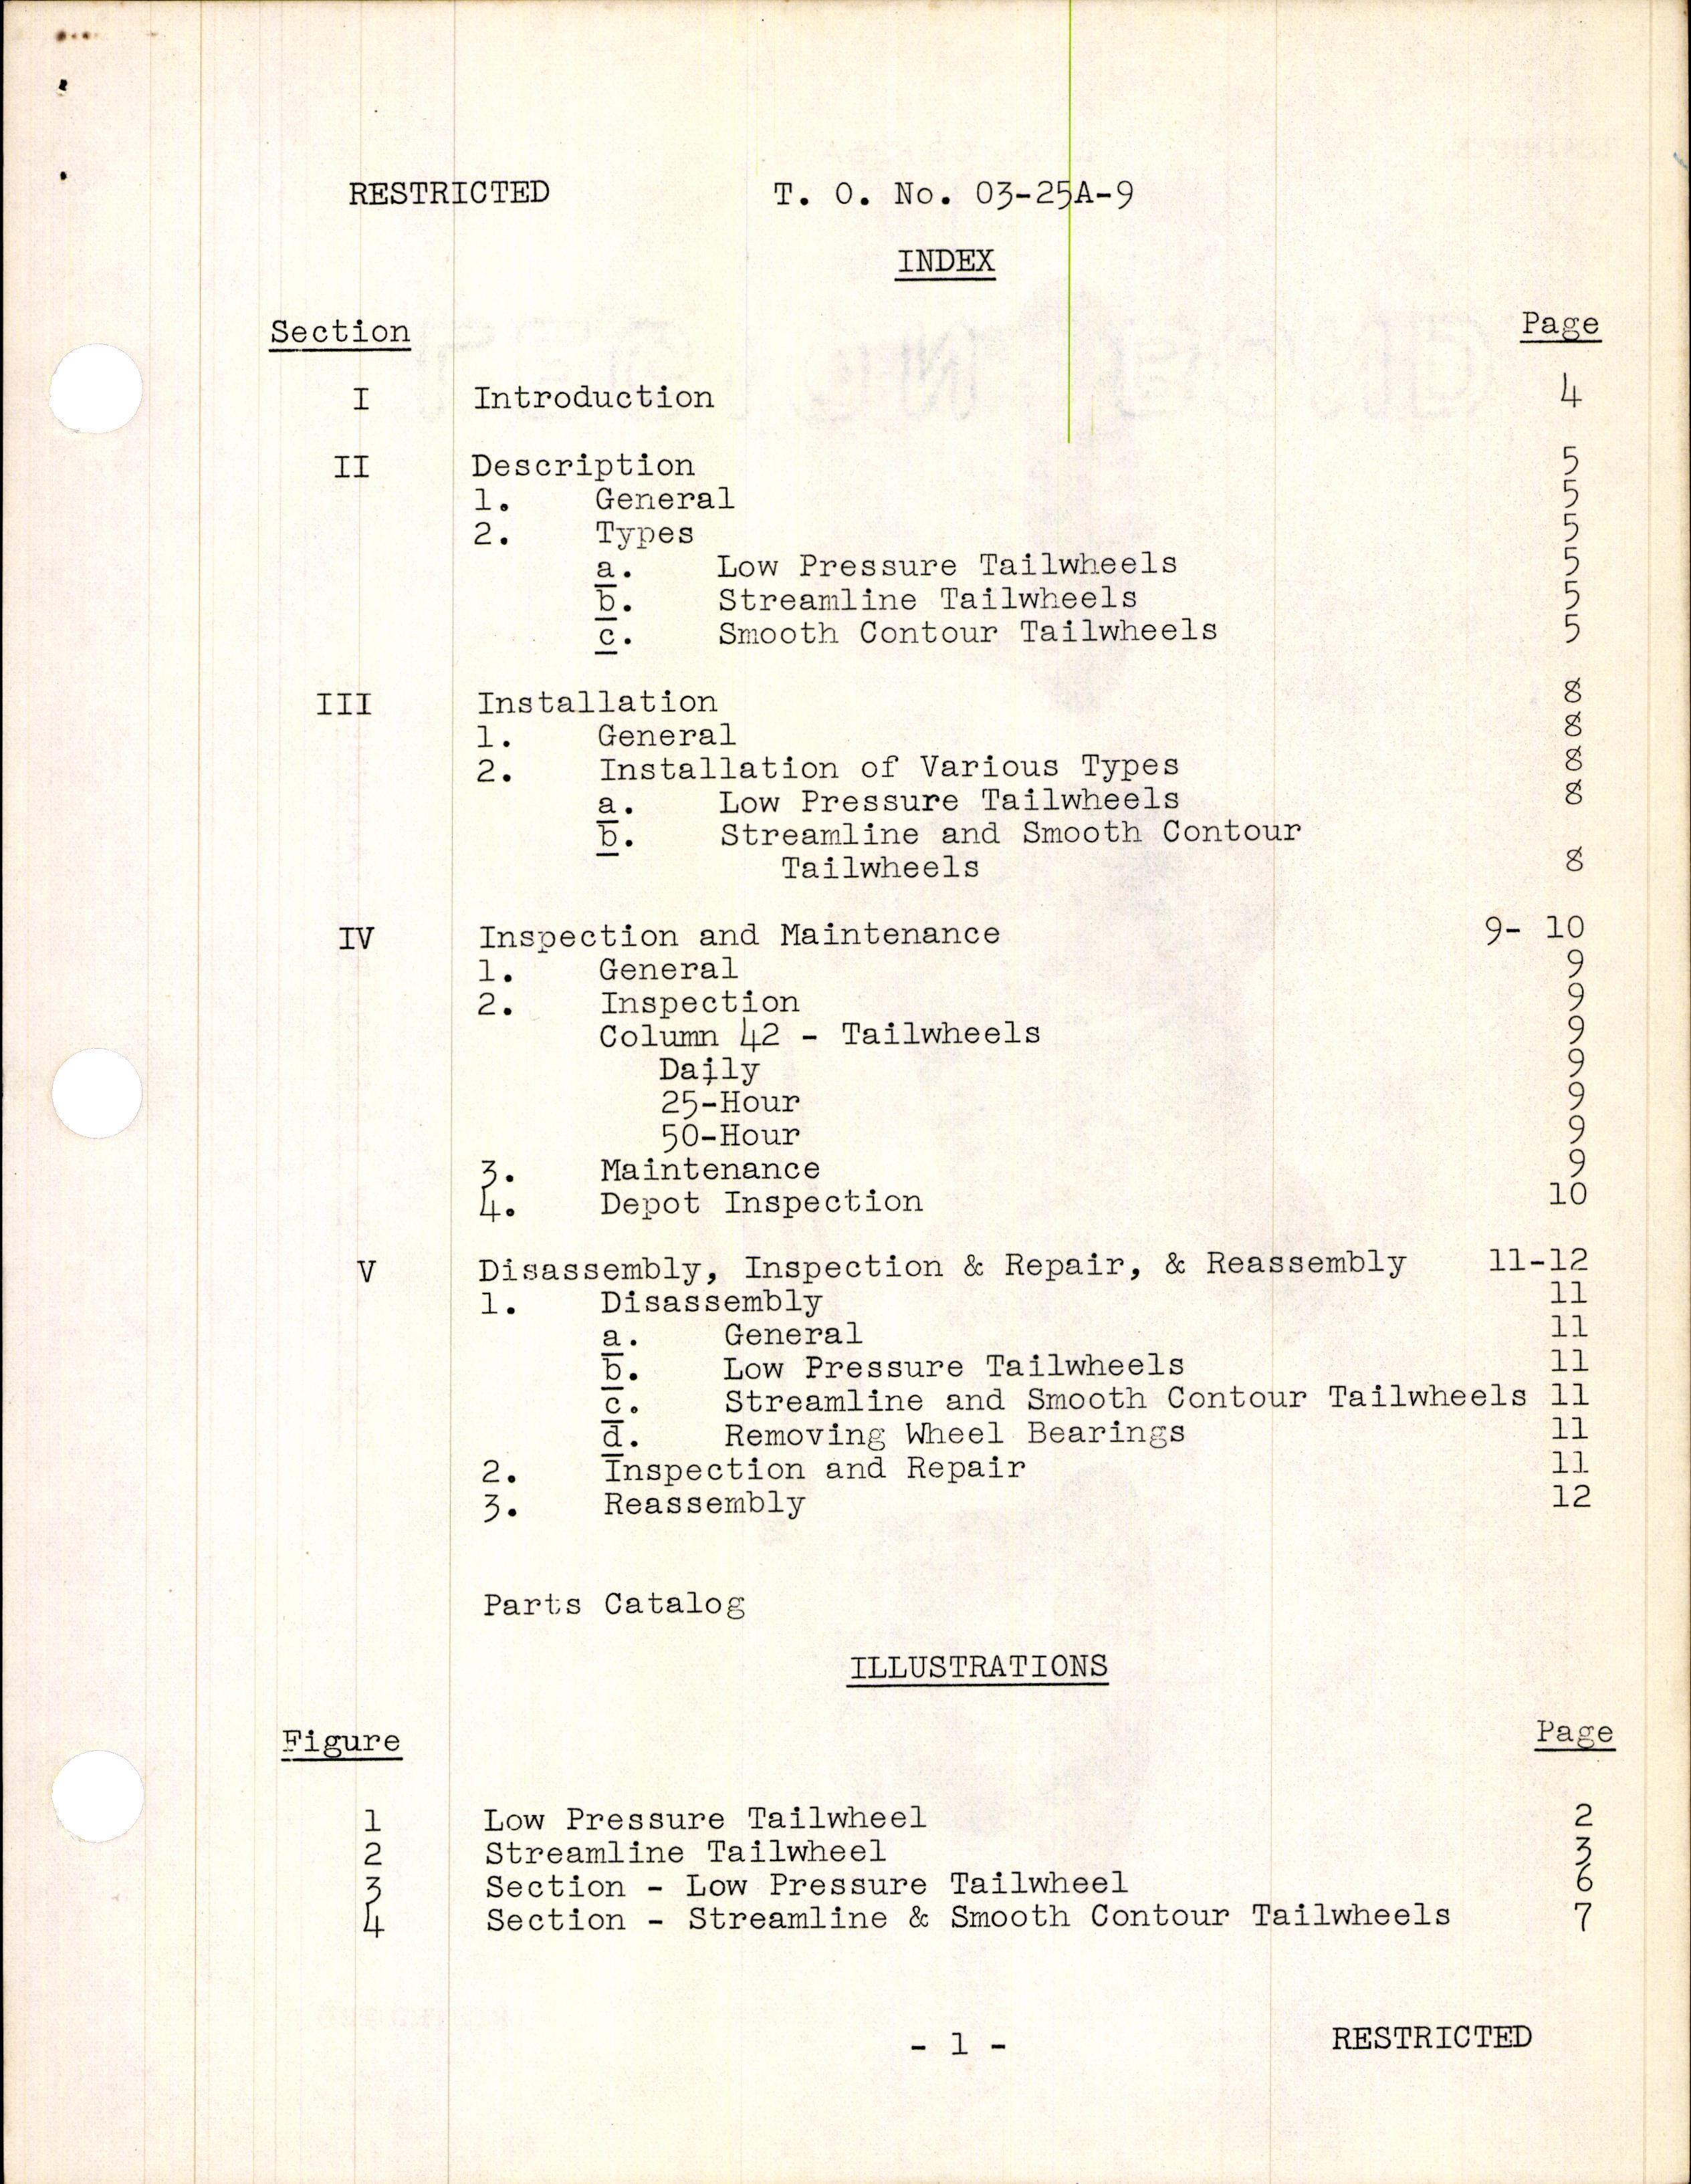 Sample page 3 from AirCorps Library document: Handbook of Instructions with Parts Catalog for Tailwheels